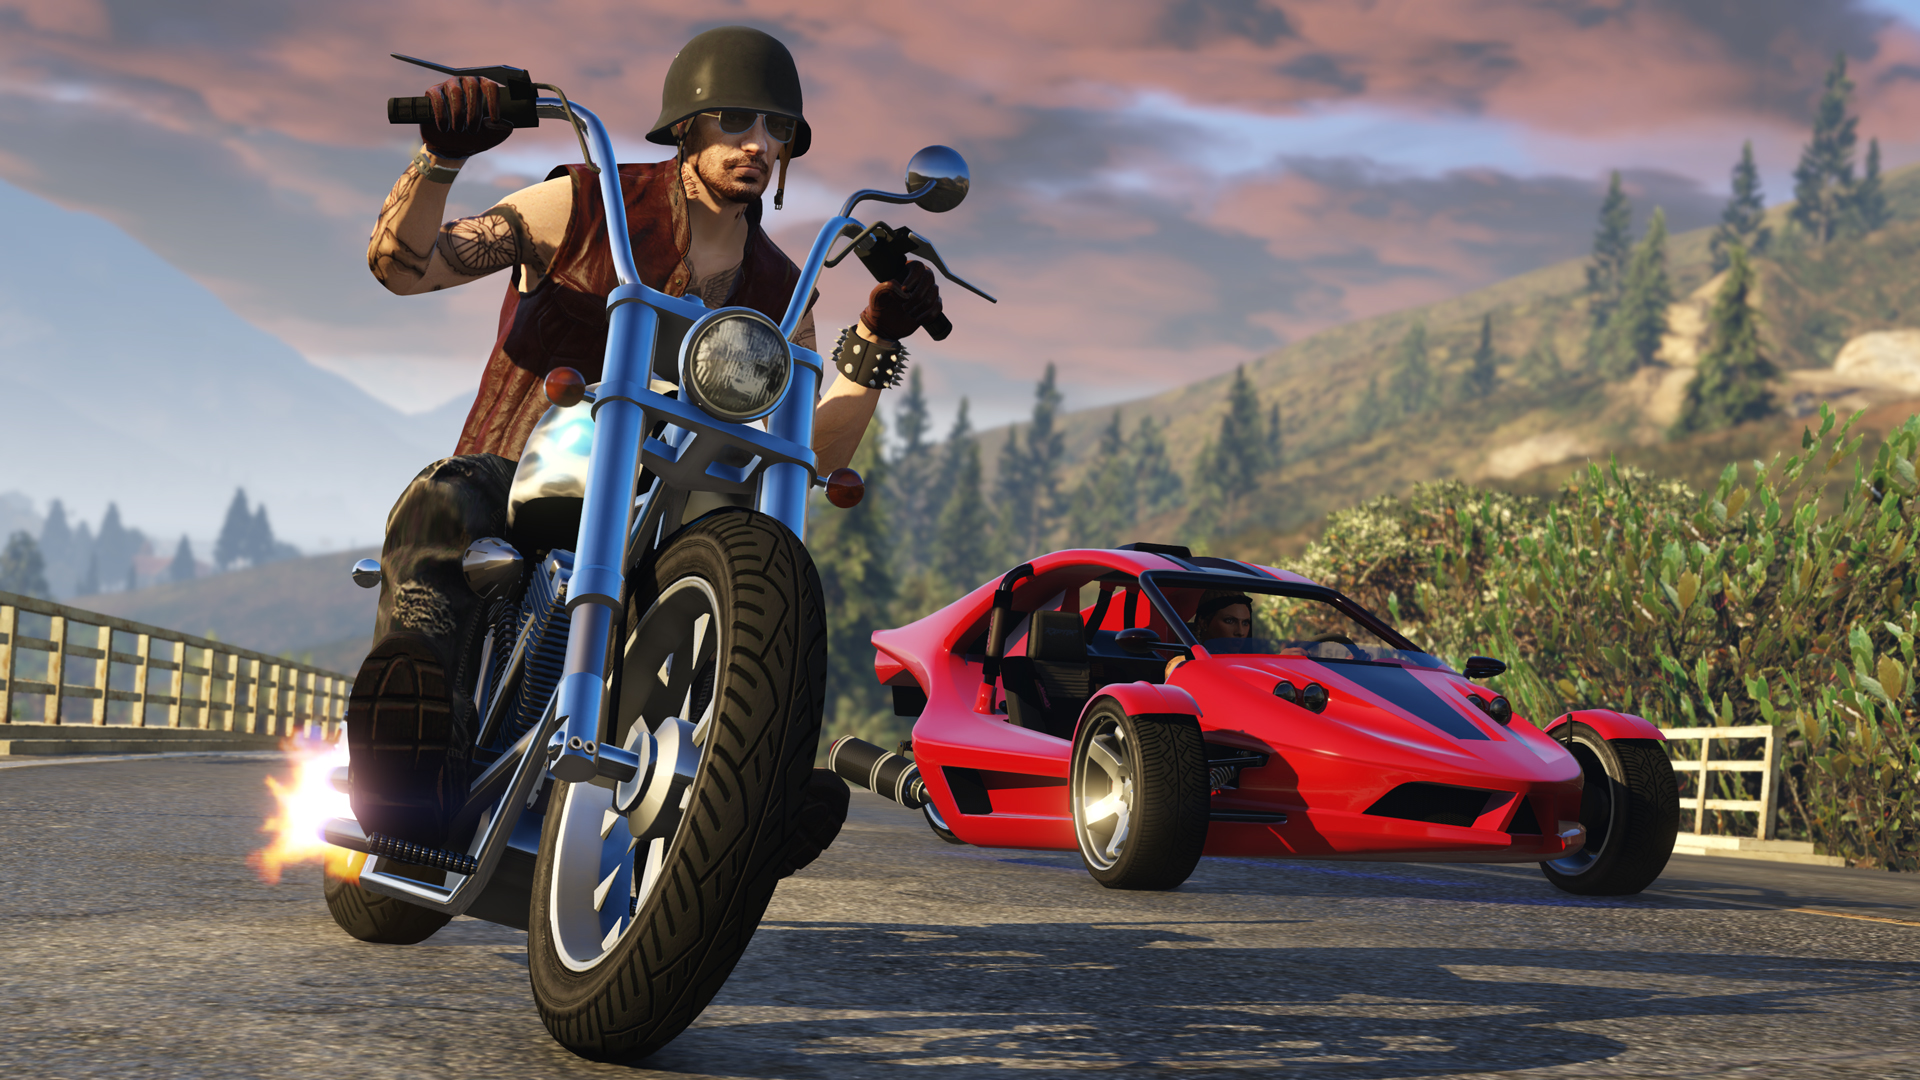 GTA Online: Bikers Update - Two New Vehicles and Sixth Purchasable